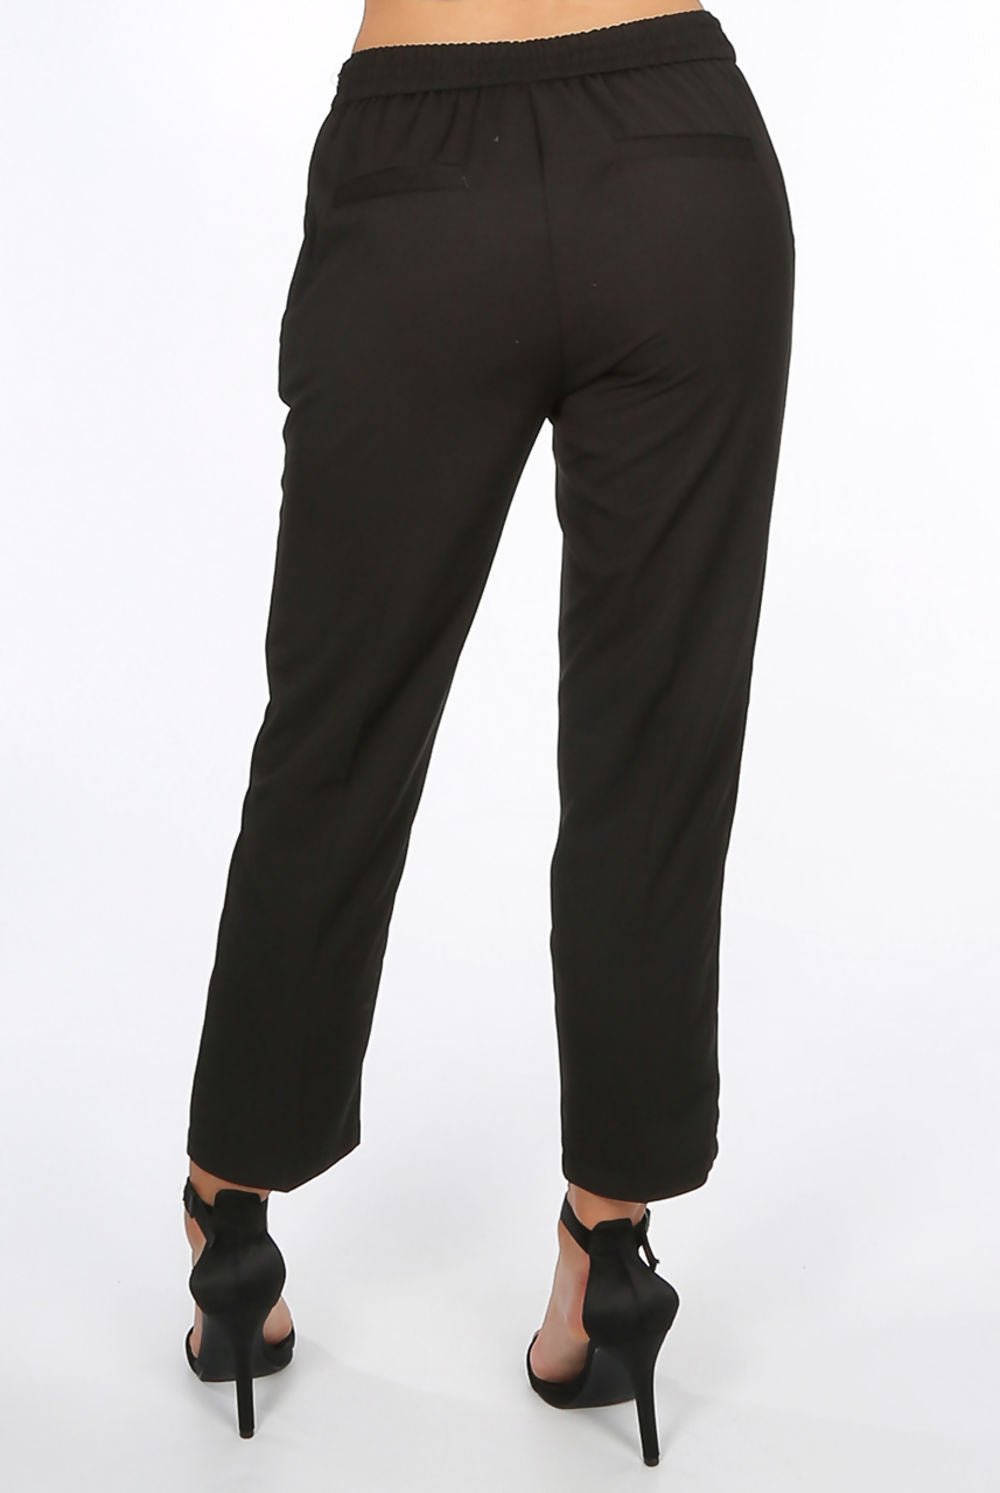 4ever Stunning black trousers. This womens trousers boasts a 3/4 leg and side zip. The back pockets have two pockets on either side.